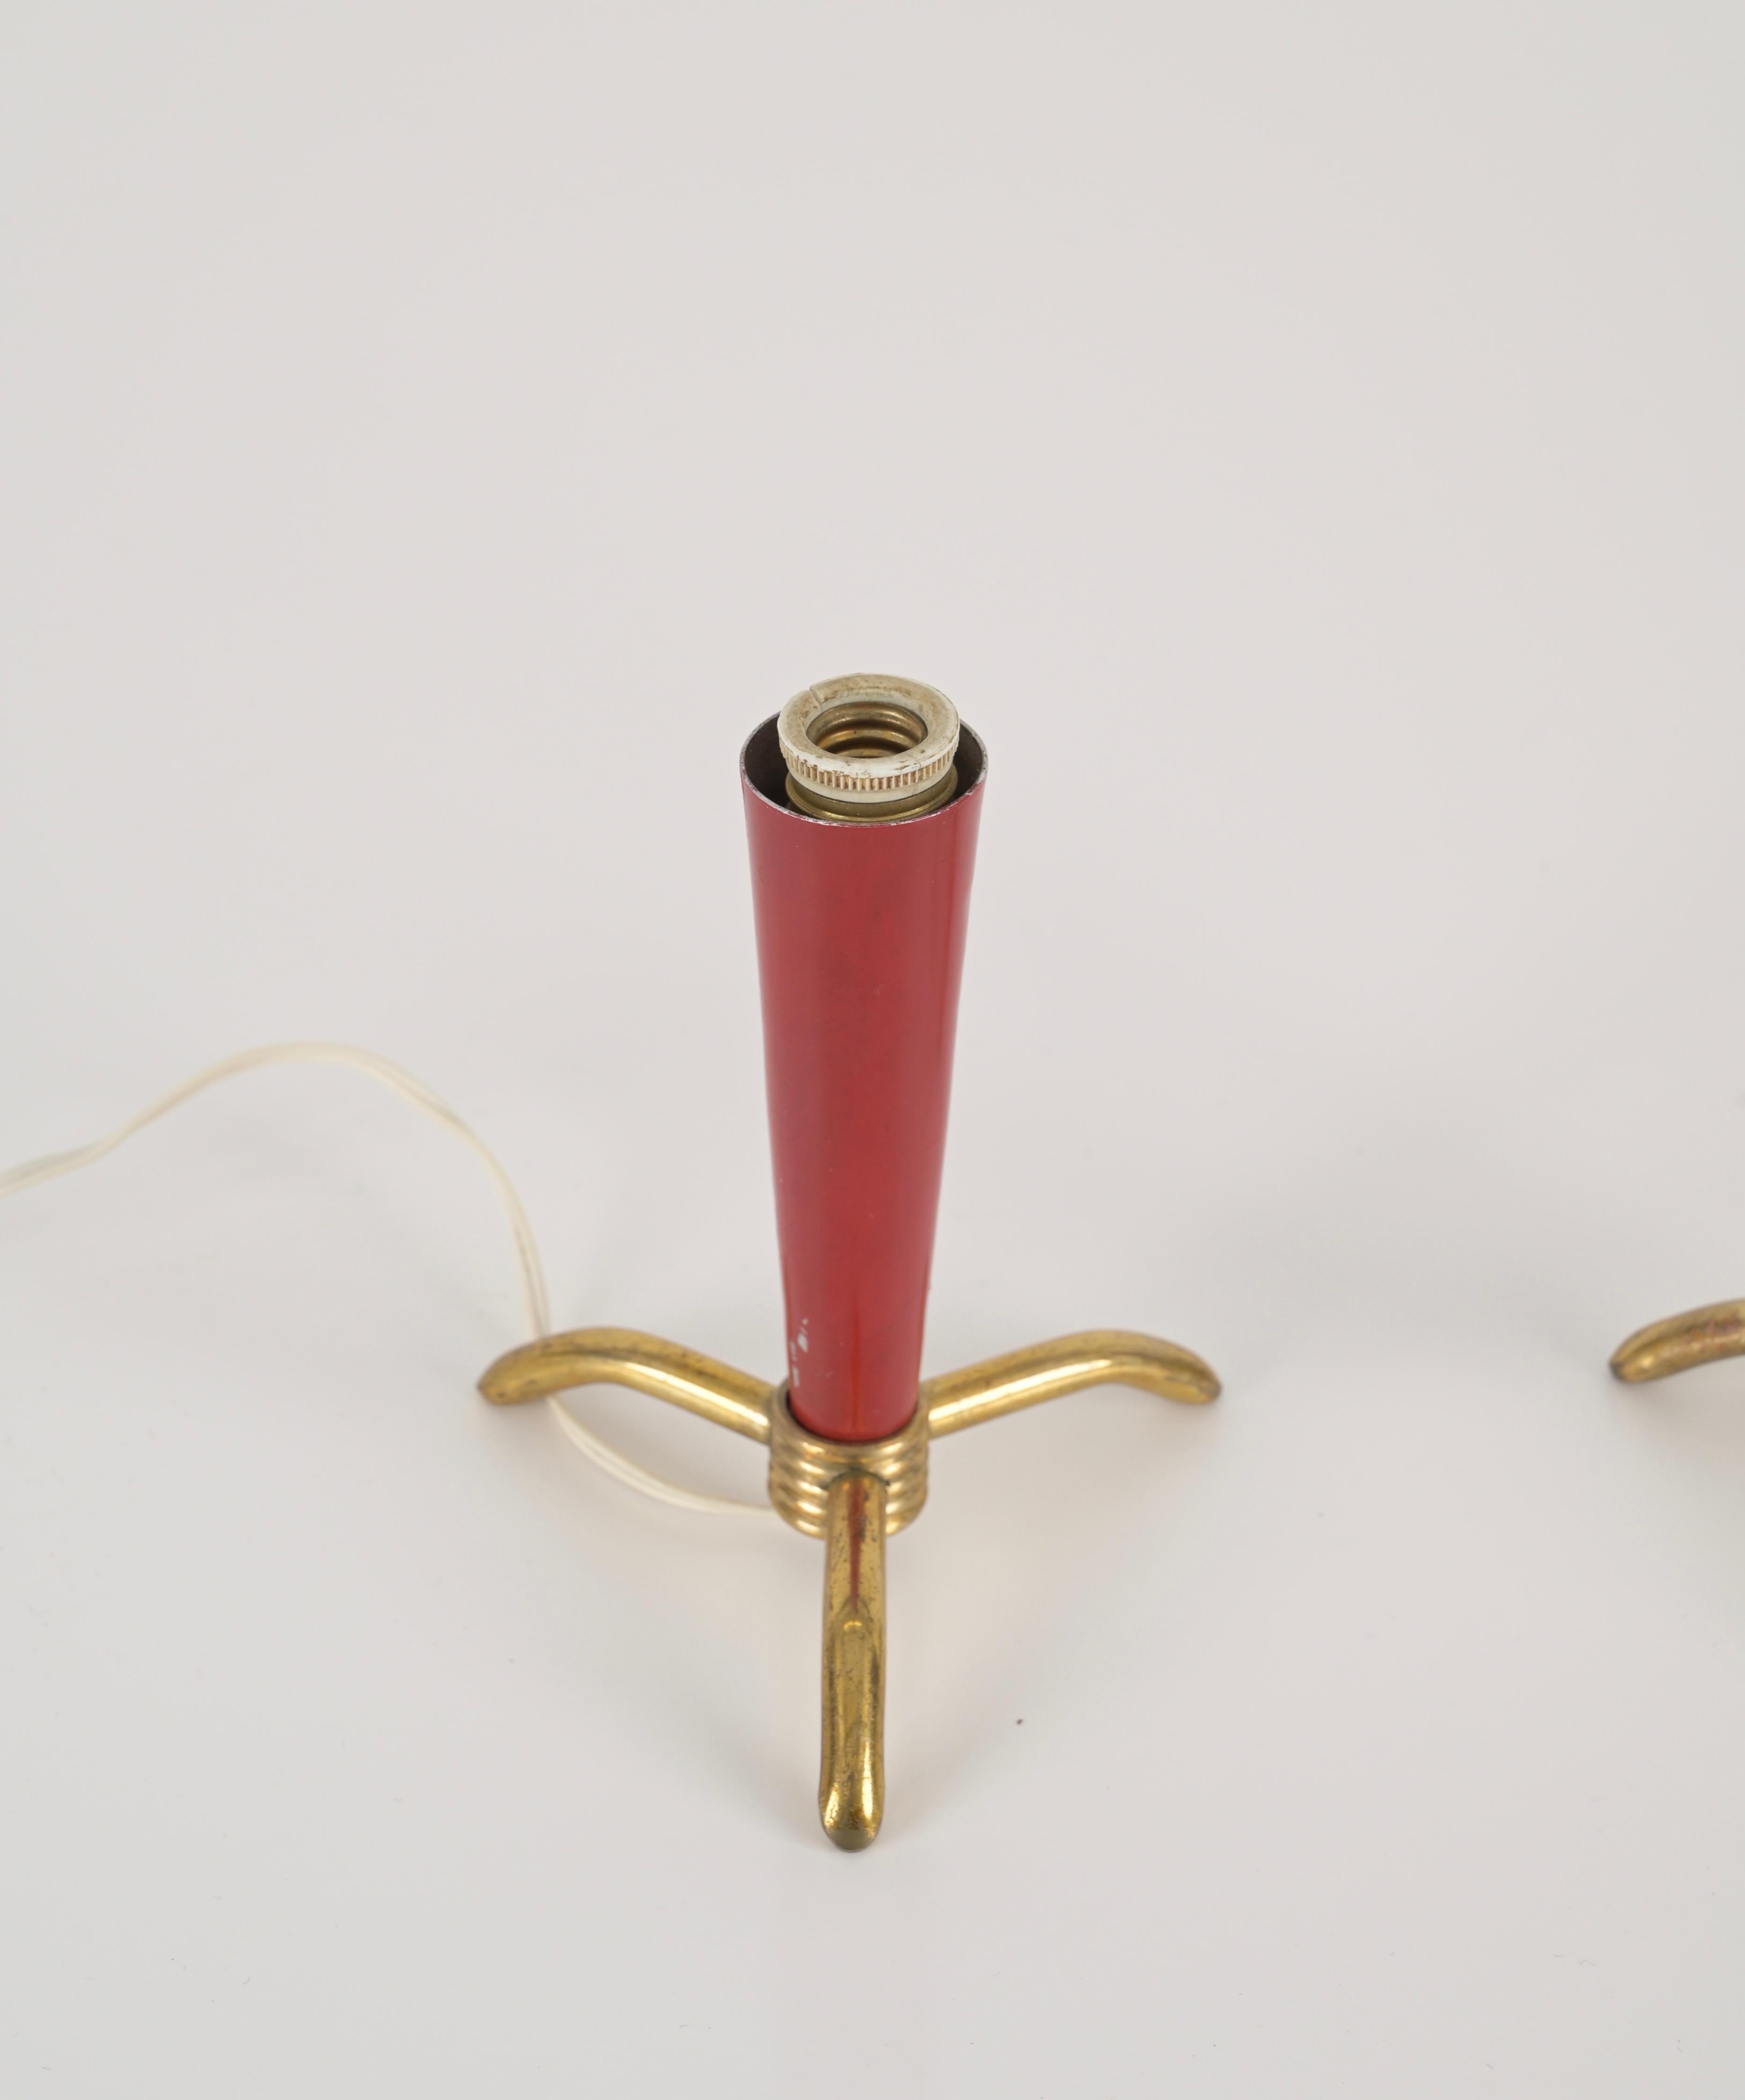 Pairs of Italian Table Lamps in Brass, Red and Ivory Metal, Stilnovo, 1950s For Sale 3